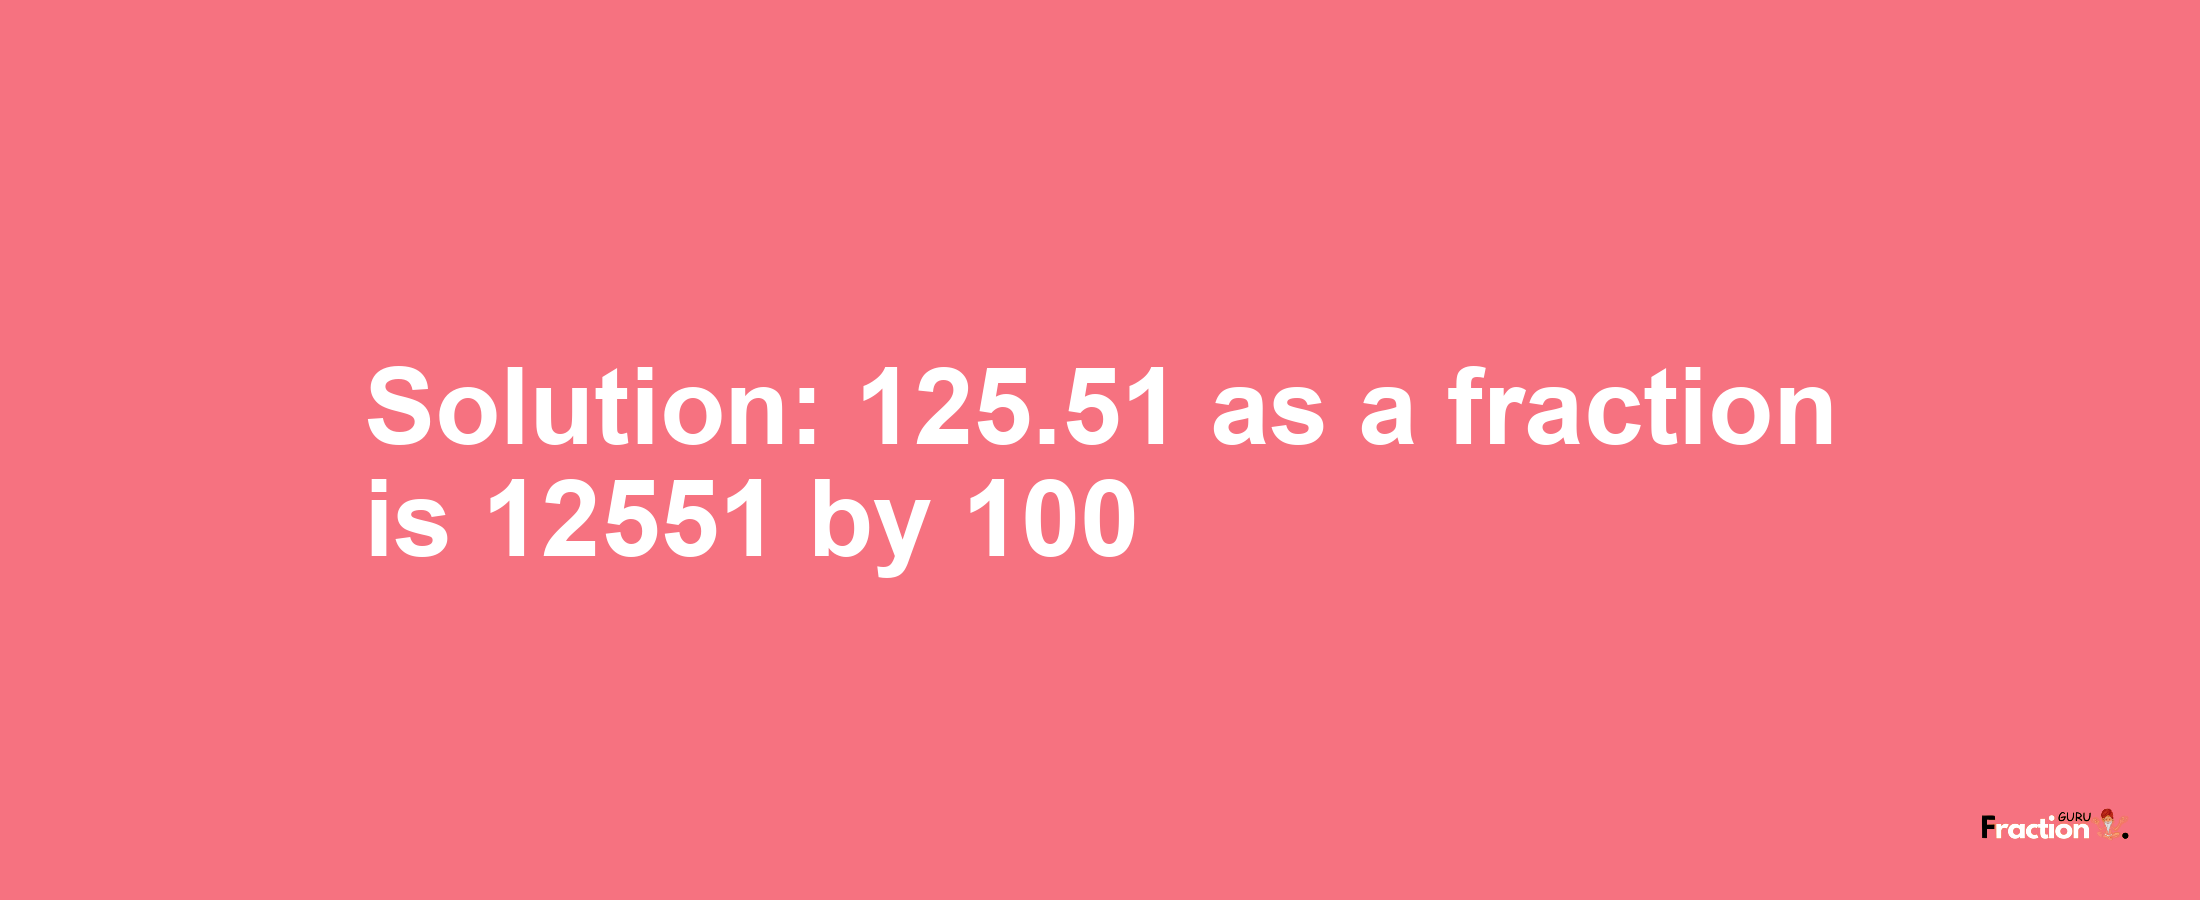 Solution:125.51 as a fraction is 12551/100